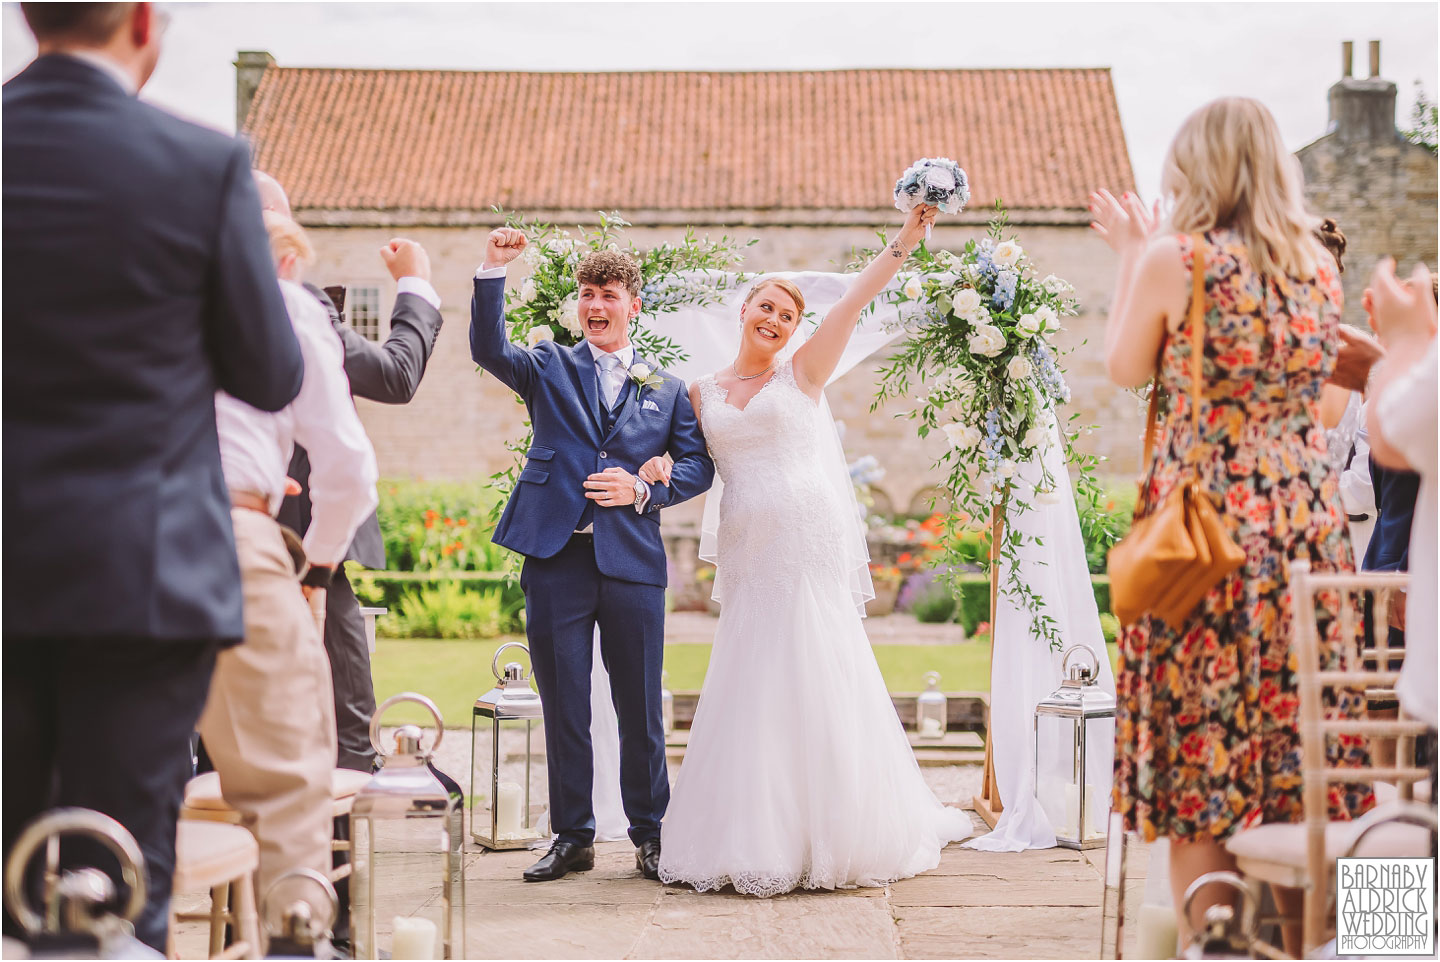 Wedding celebration at Priory Cottages wetherby, Priory Cottages Yorkshire wedding,